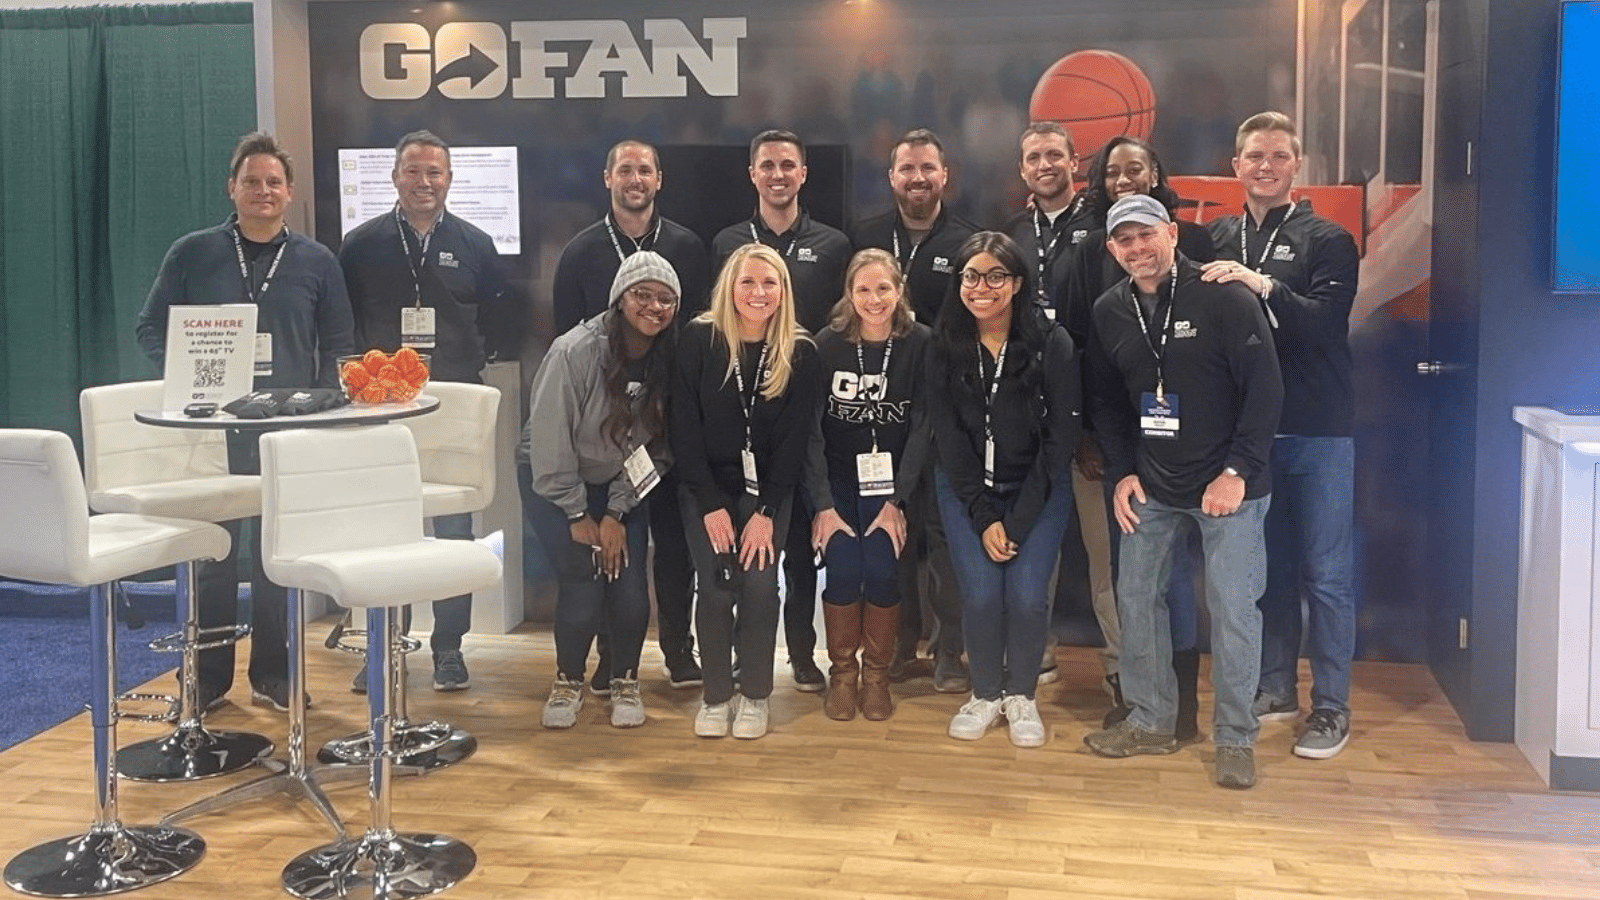 Reflections on the 2021 National Athletic Directors Conference